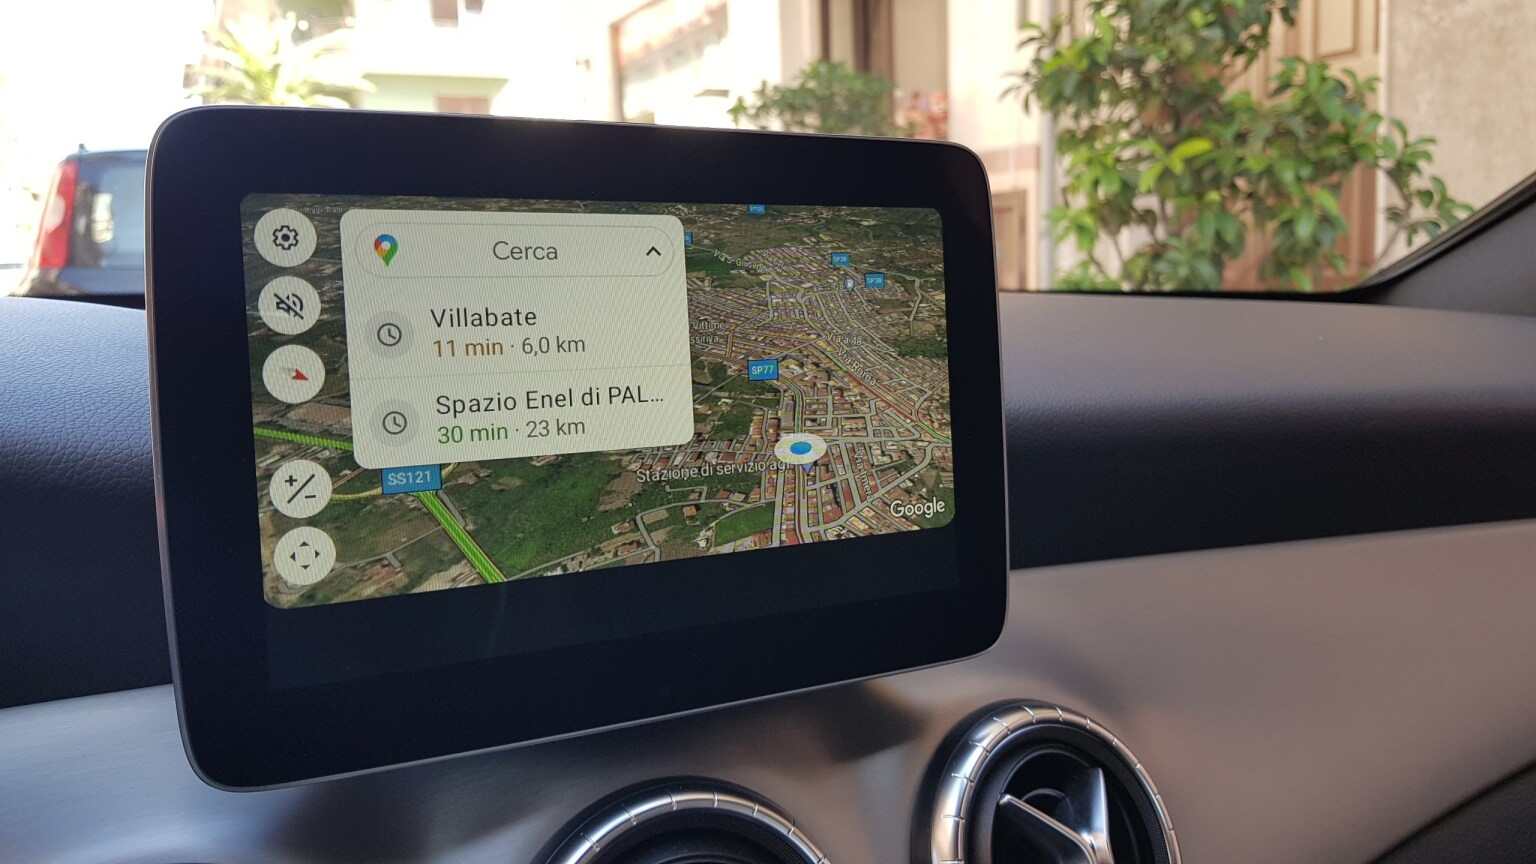 Navigation bar missing in Android Auto 